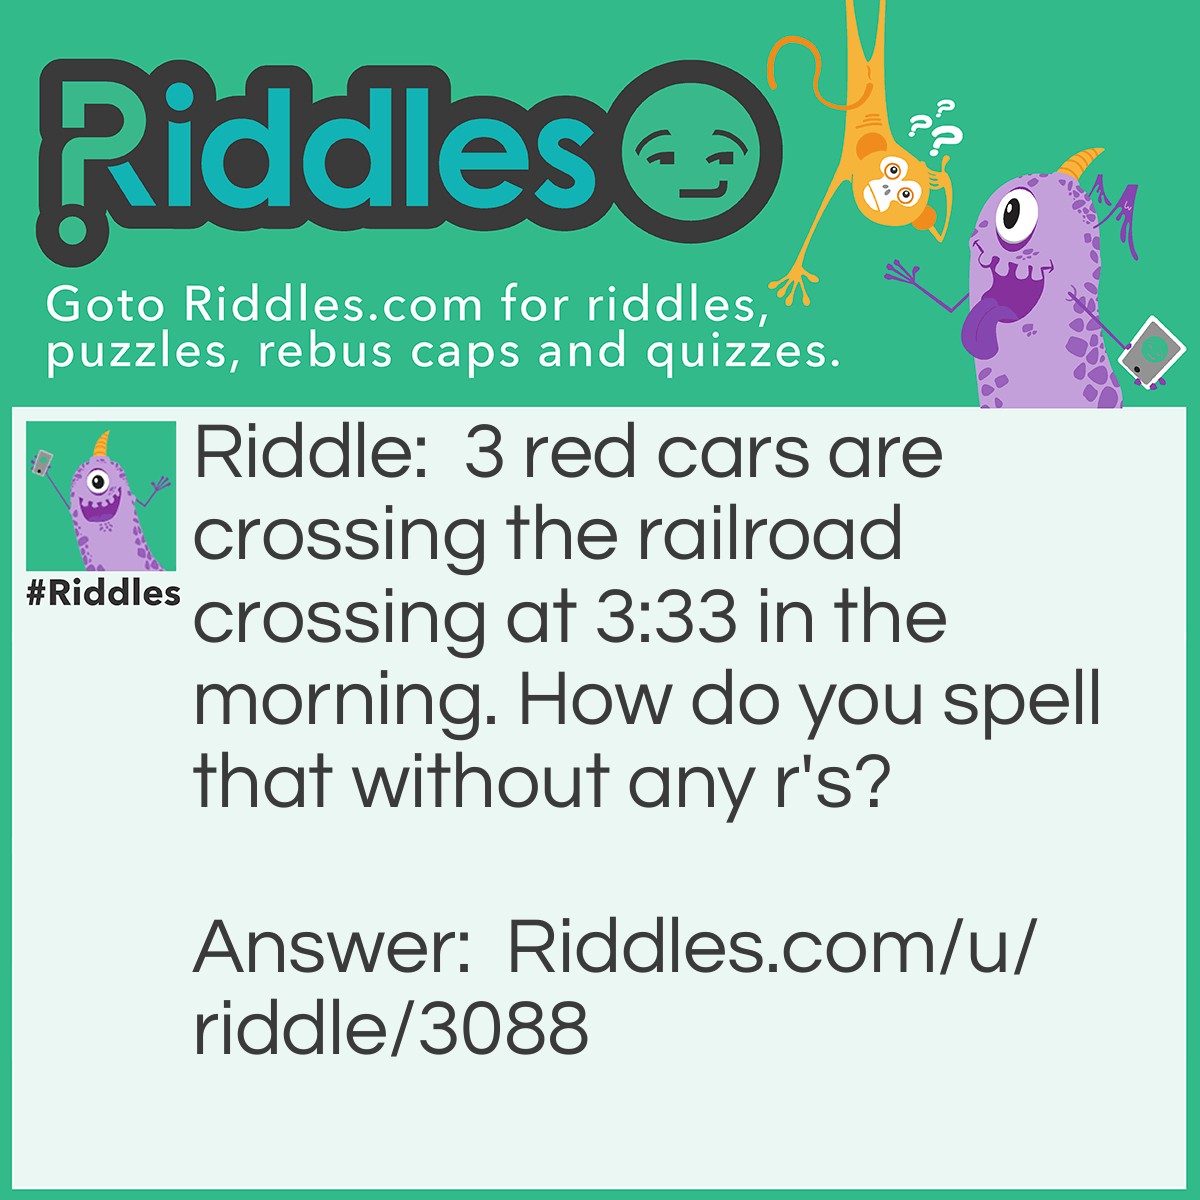 Riddle: 3 red cars are crossing the railroad crossing at 3:33 in the morning. How do you spell that without any r's? Answer: That.